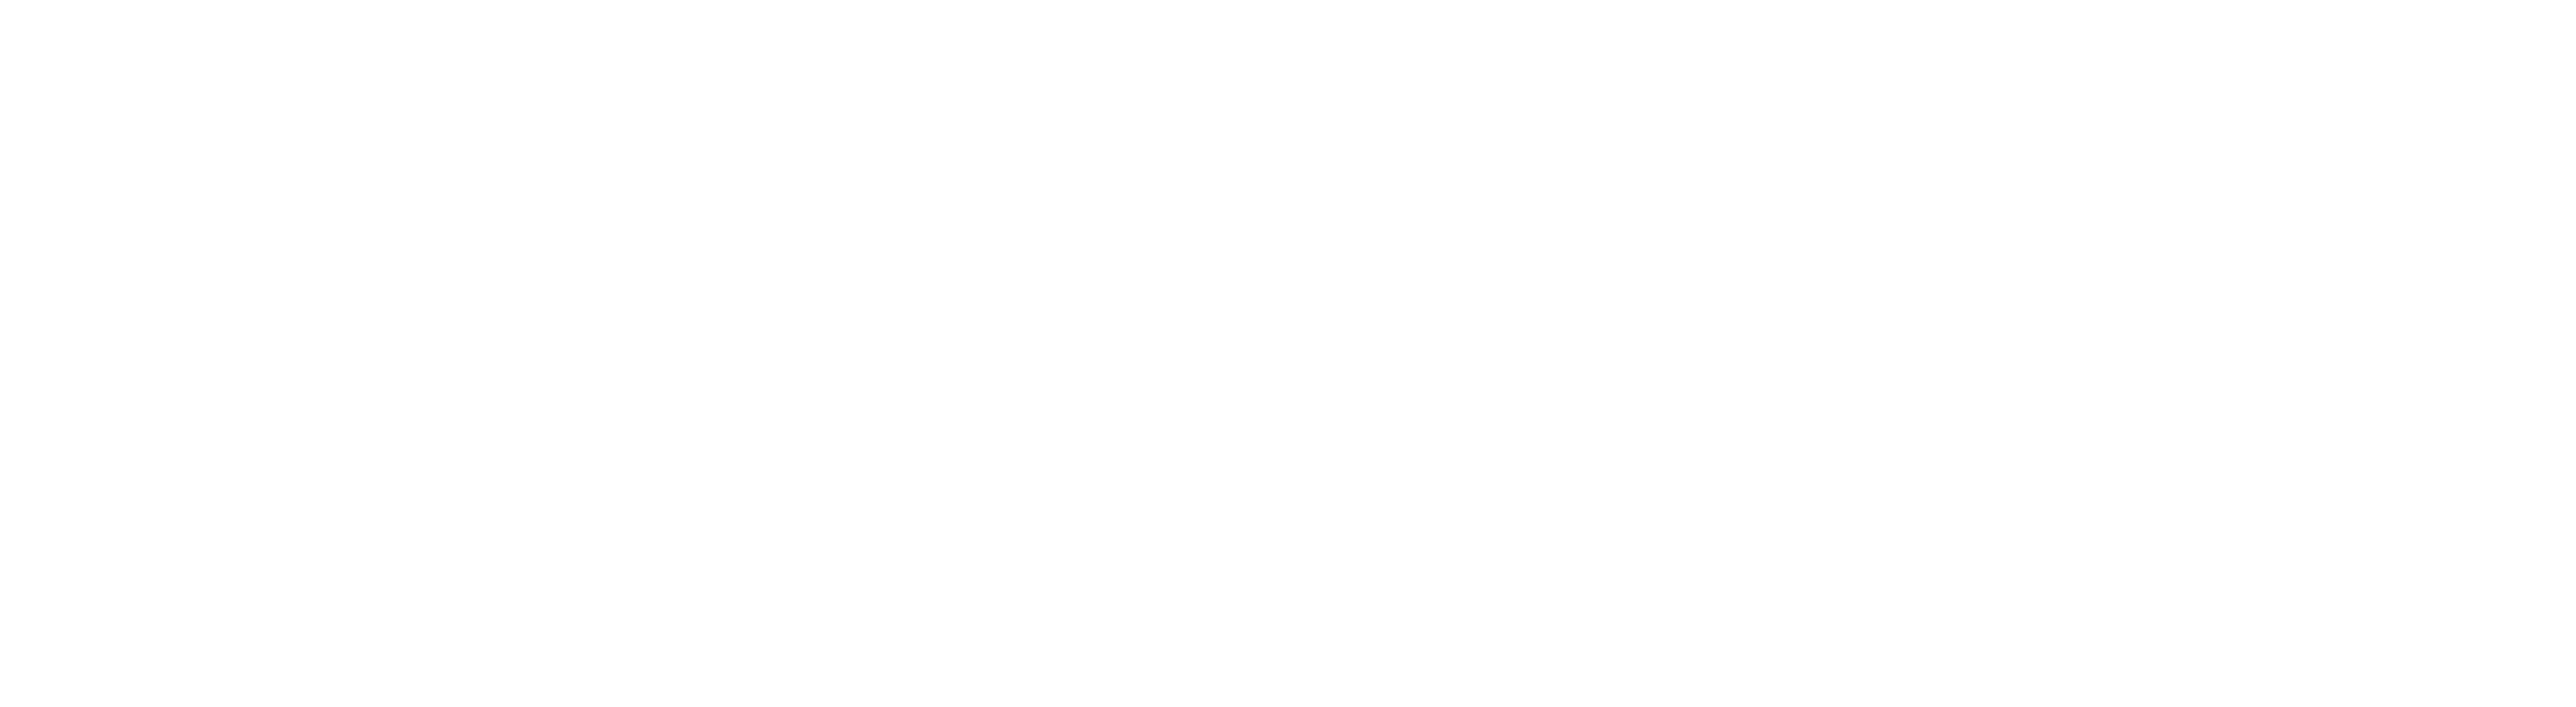 The Hamil Family Funeral Home Logo